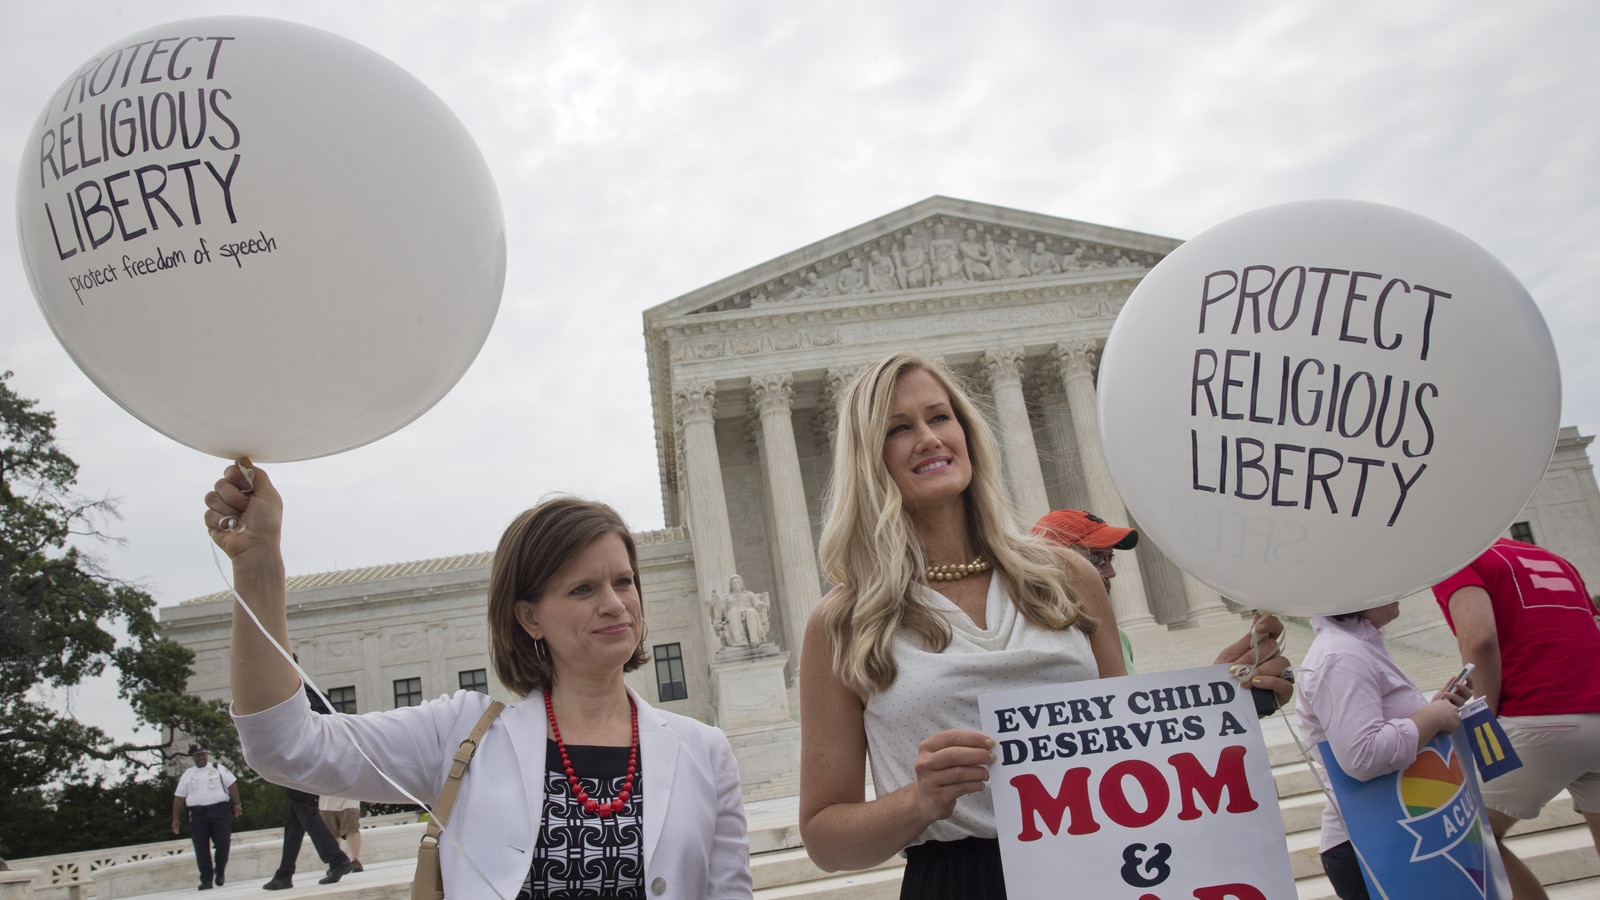 Jennifer Marshall (left), with the Heritage Foundation, and Summer Ingram, with the Congressional Prayer Caucus Foundation, who said they support "traditional marriage" hold balloons that says "protect religious liberty" outside of the Supreme Court Friday June 26, 2015, in Washington. (AP Photo/Jacquelyn Martin)